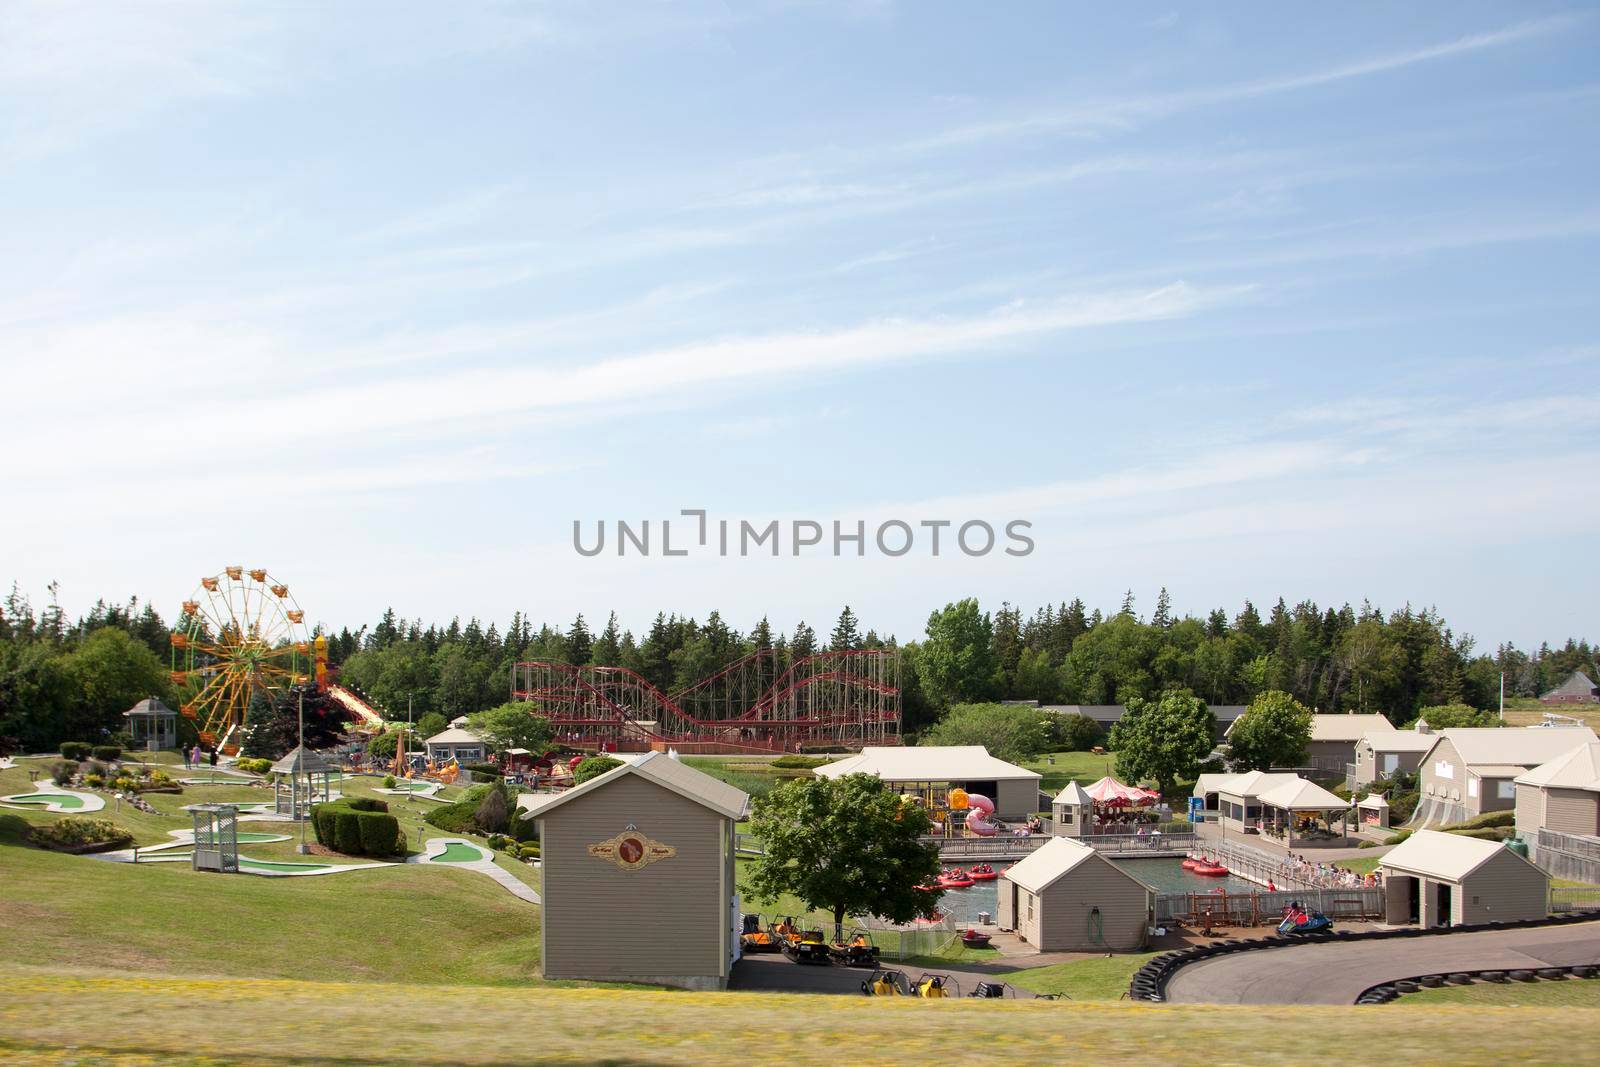  July 27, 2019- New Glasgow, PEI - overlooking the popular tourist park of Sandspit in the Cavendish area